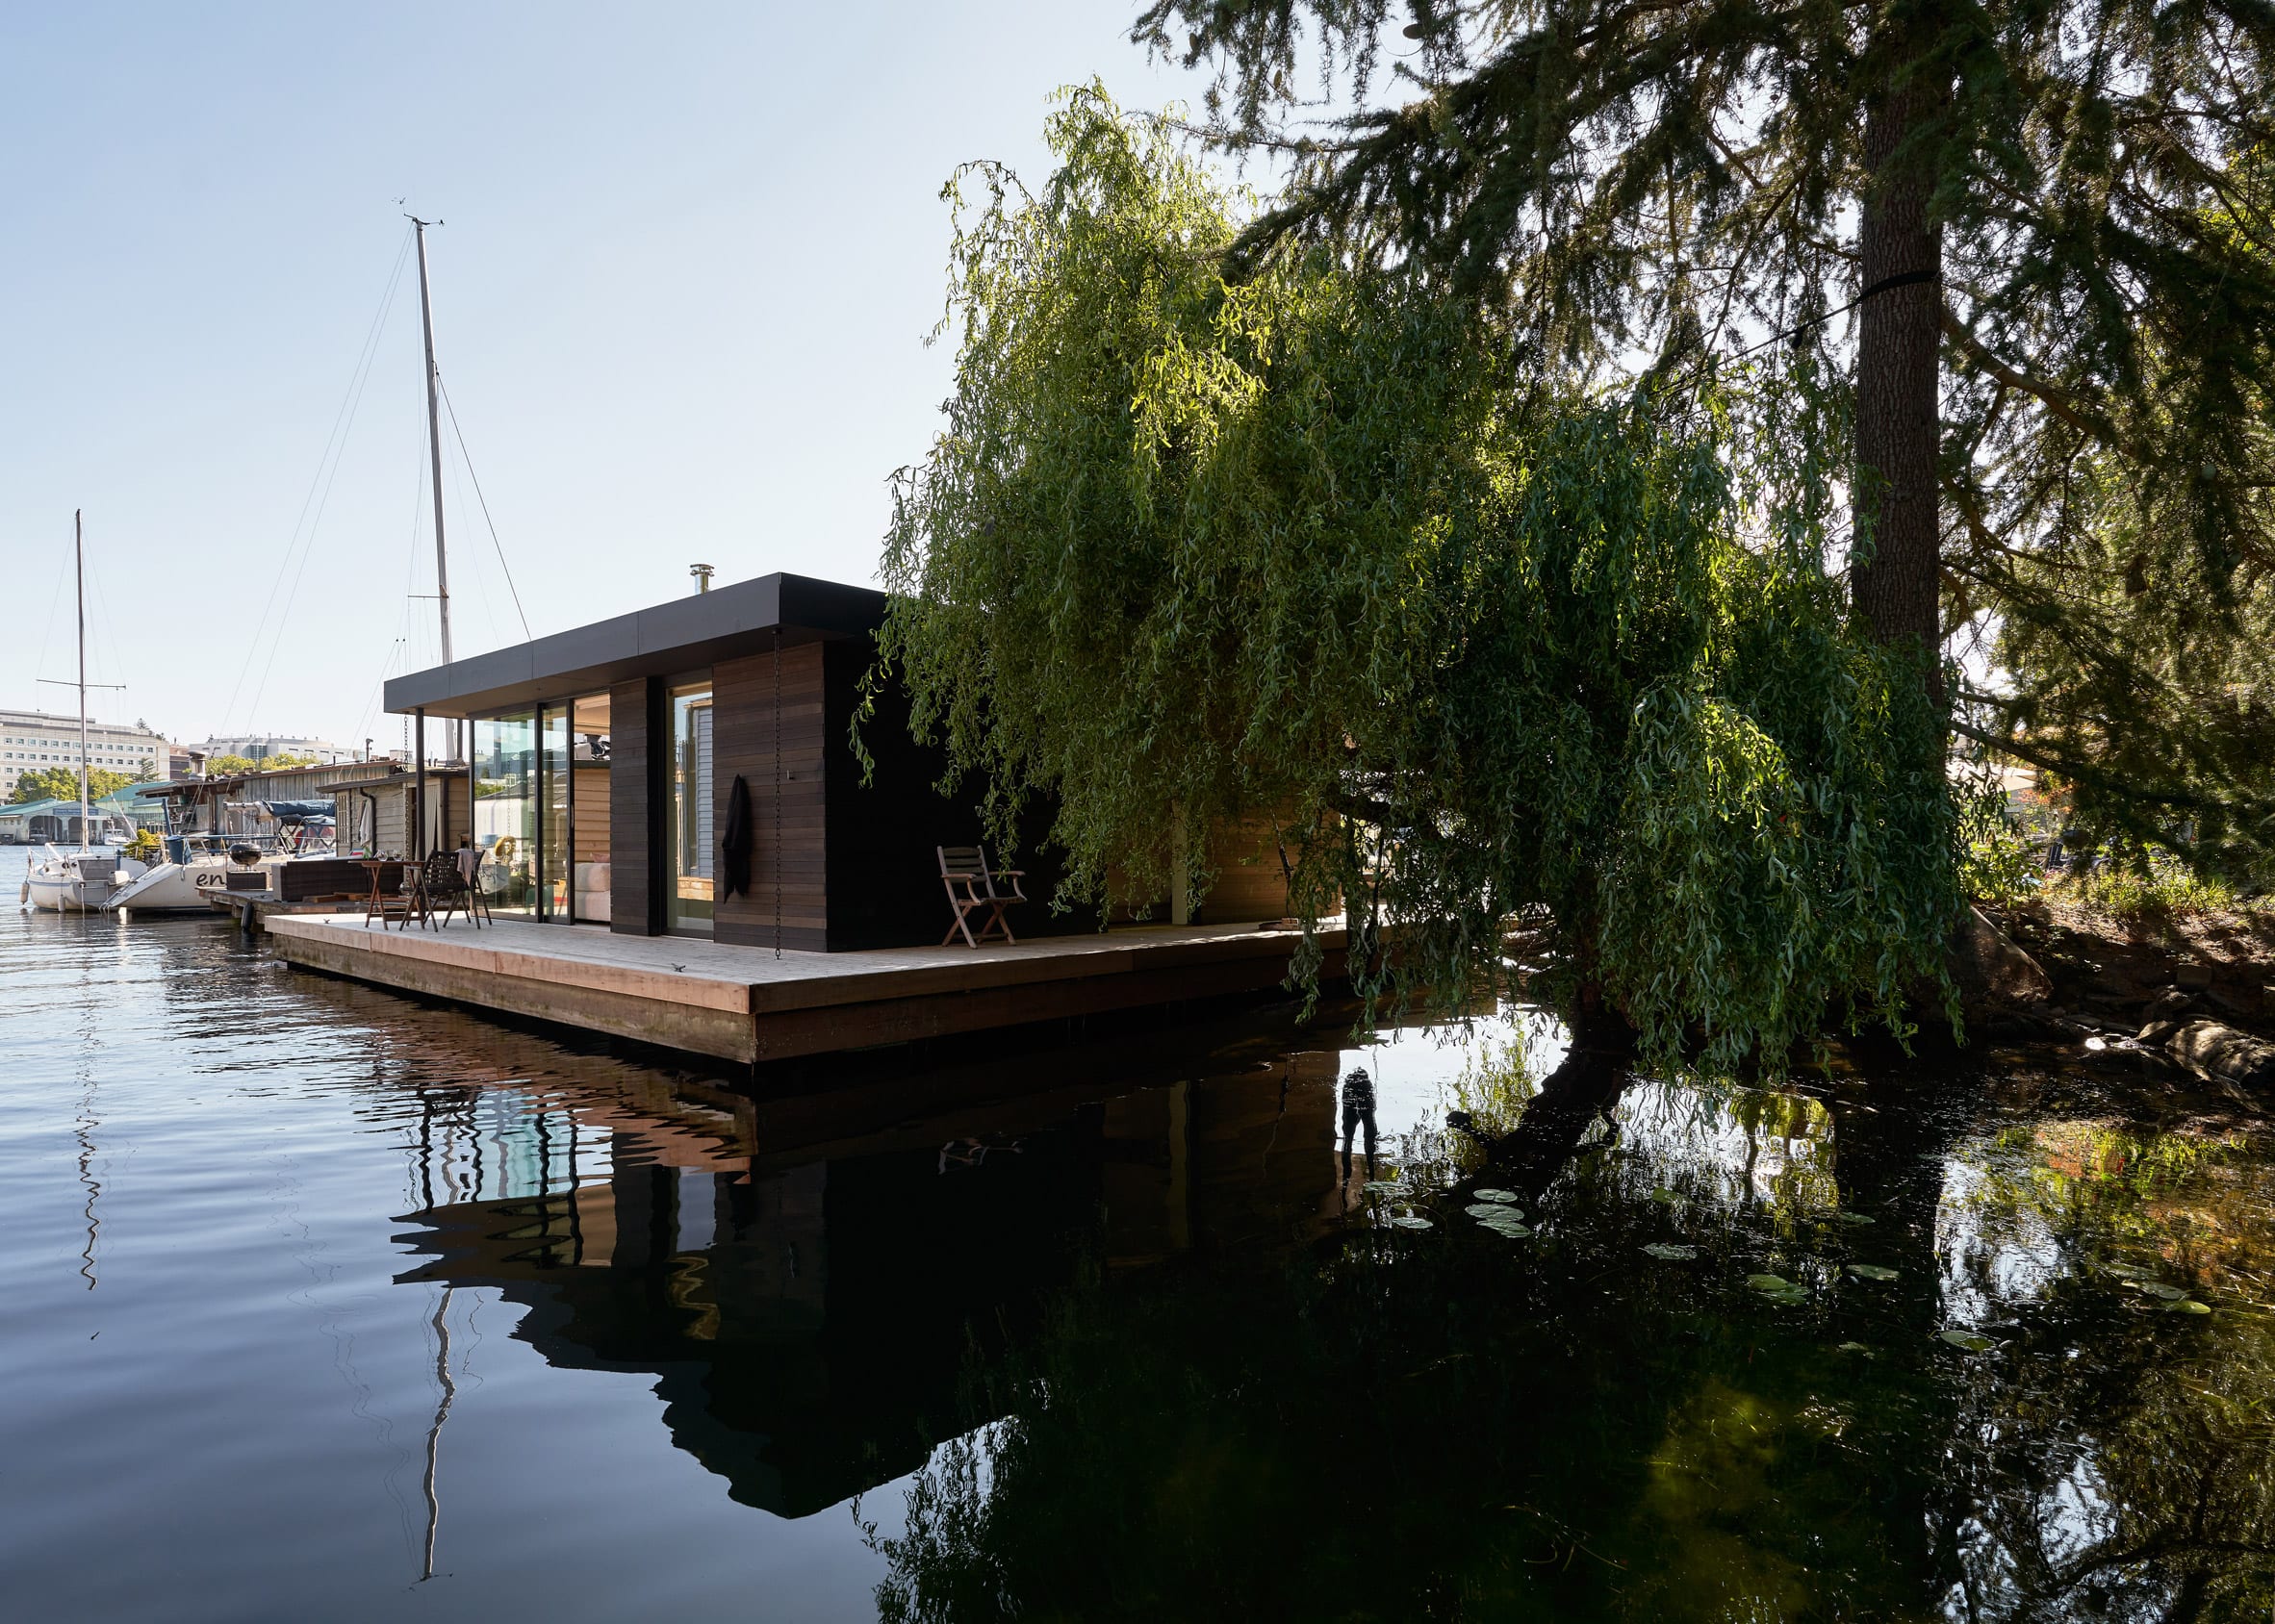 Studio Diaa Designs Floating Home For